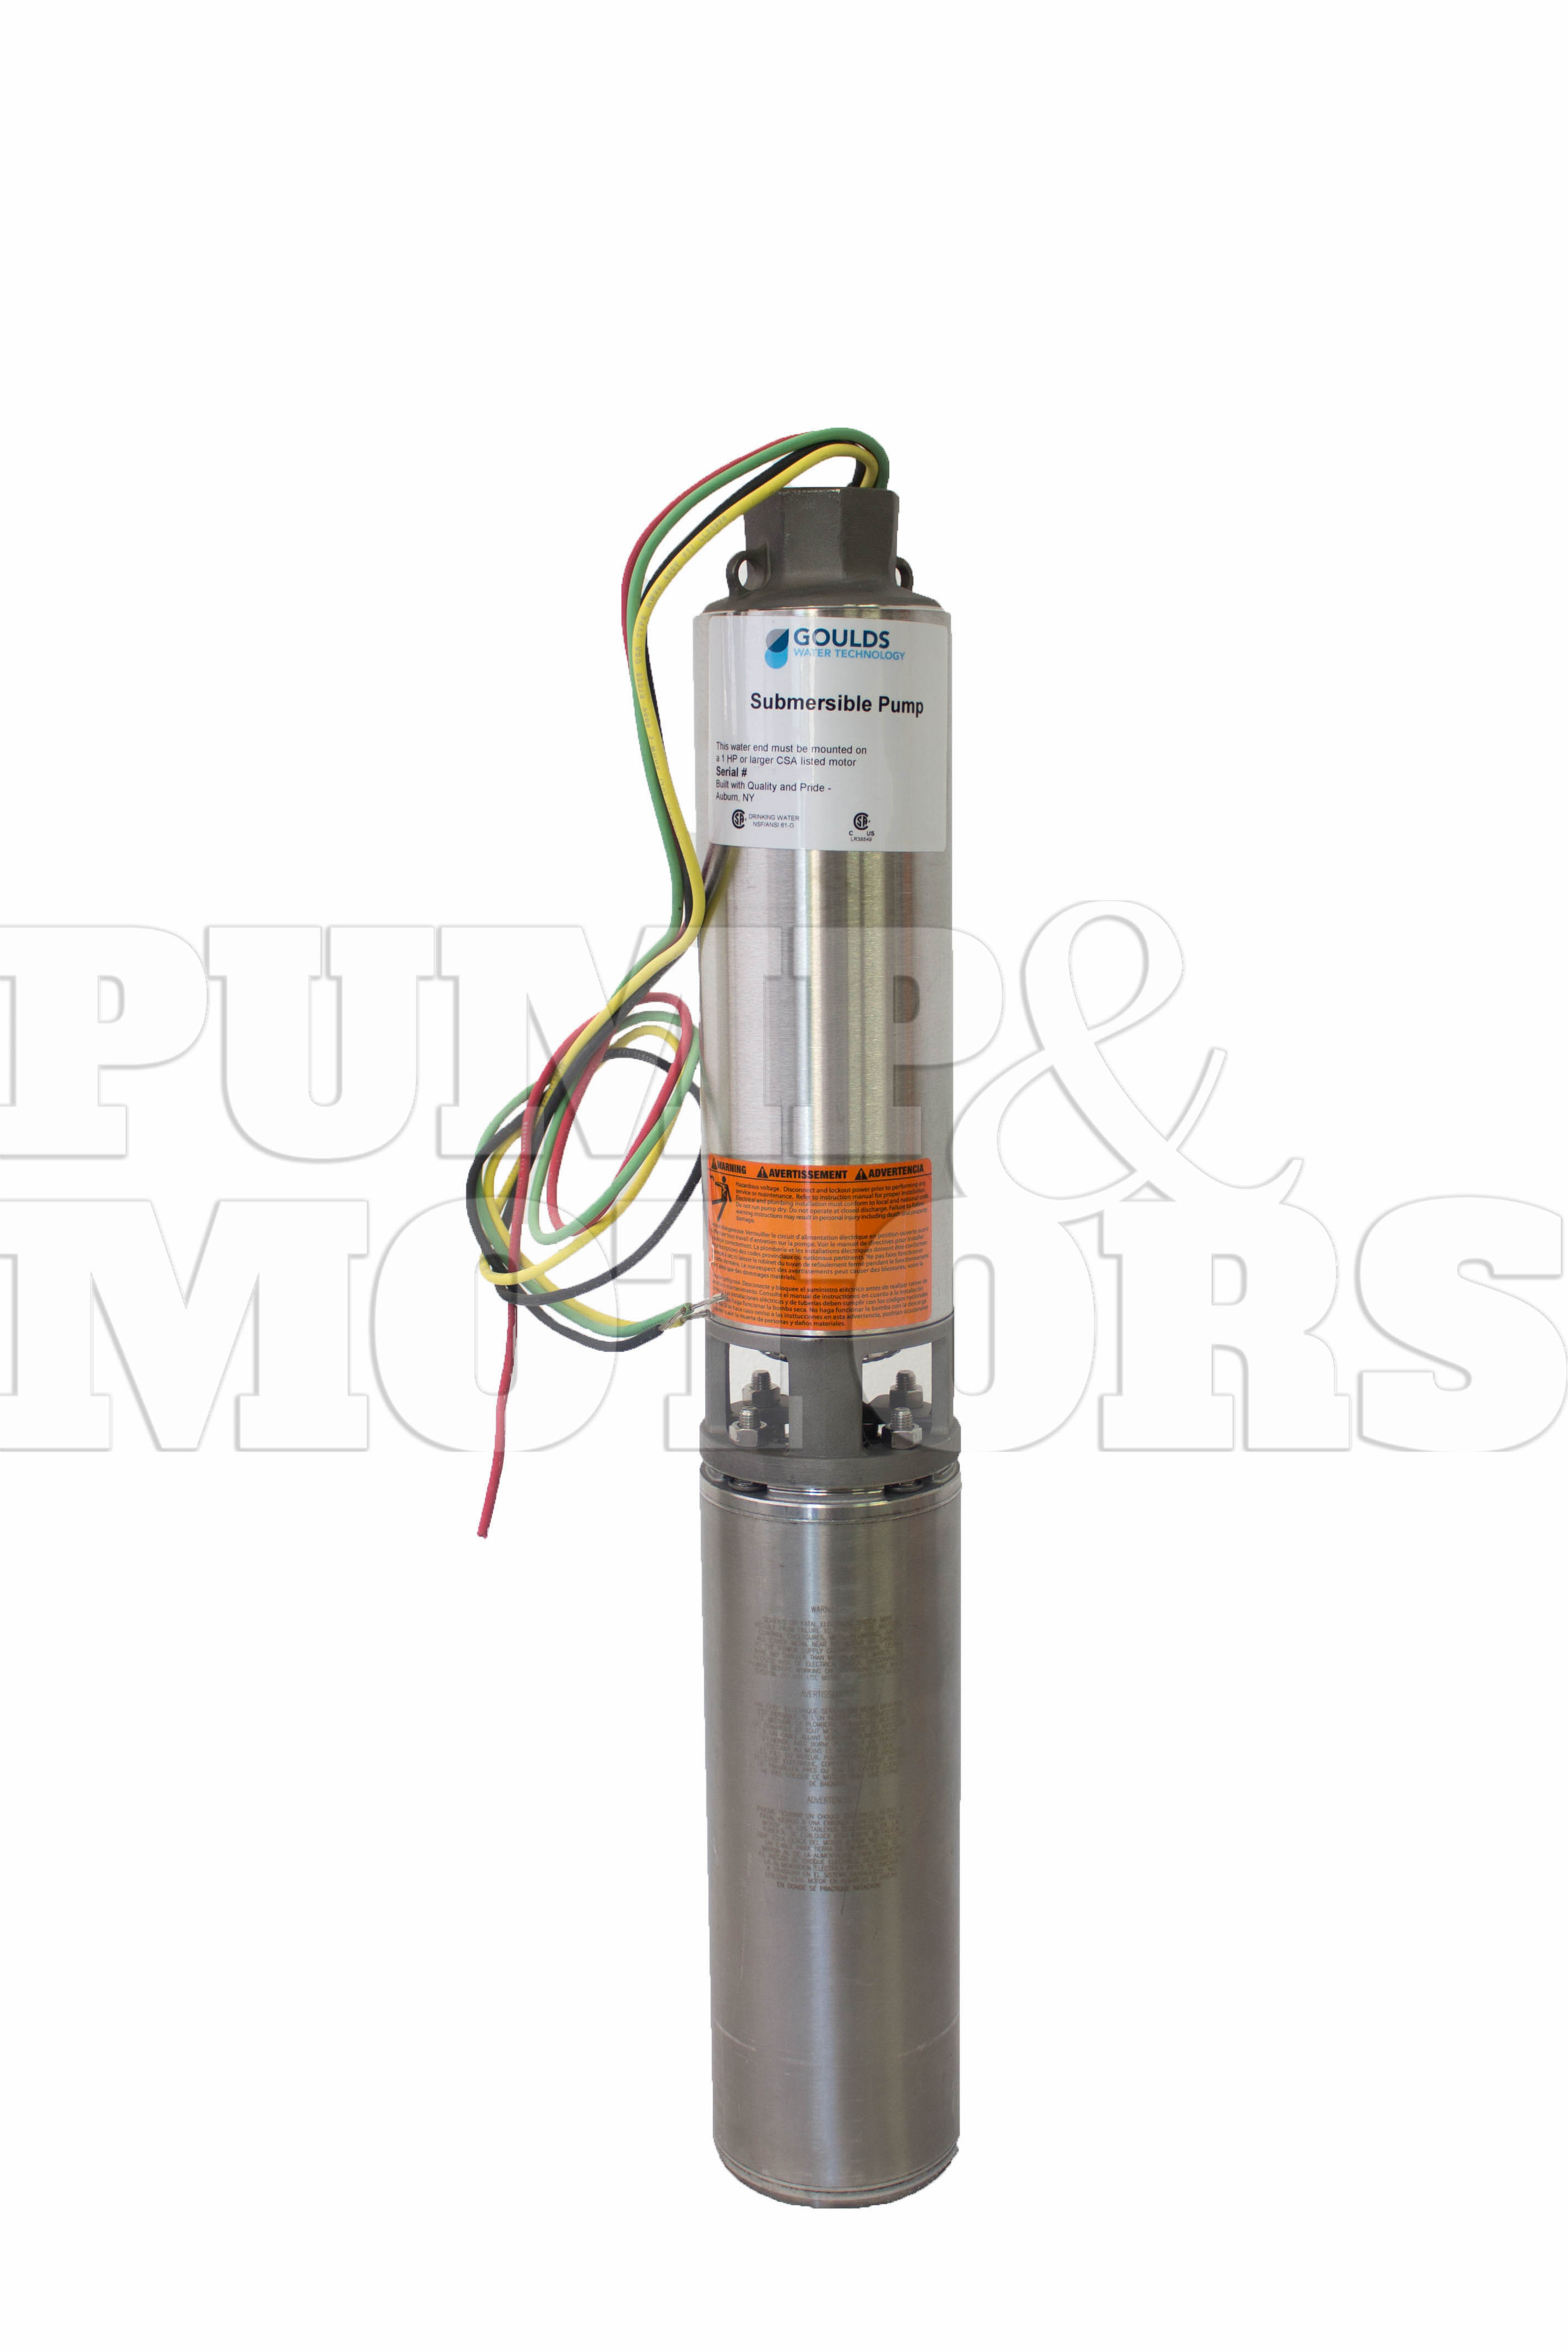 Goulds 33GS30412CL 3 HP 230V Submersible Water Well Pump 33GPM